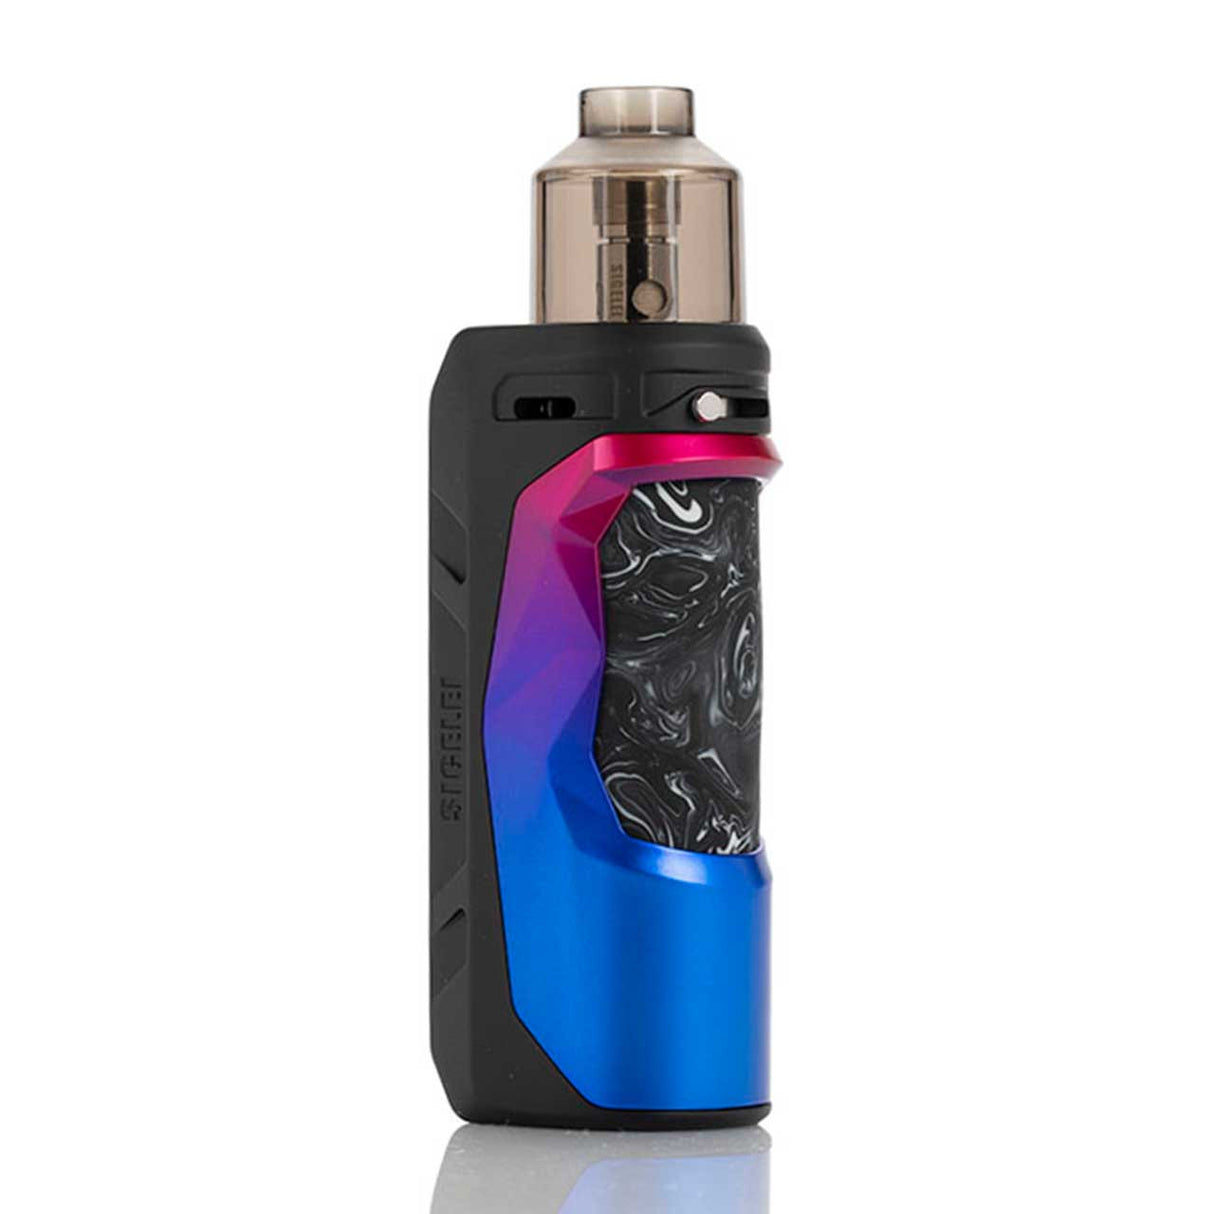 Sigelei HUMVEE 80W Box Mod Starter Kit with zinc-alloy body and rubberized hand grip.